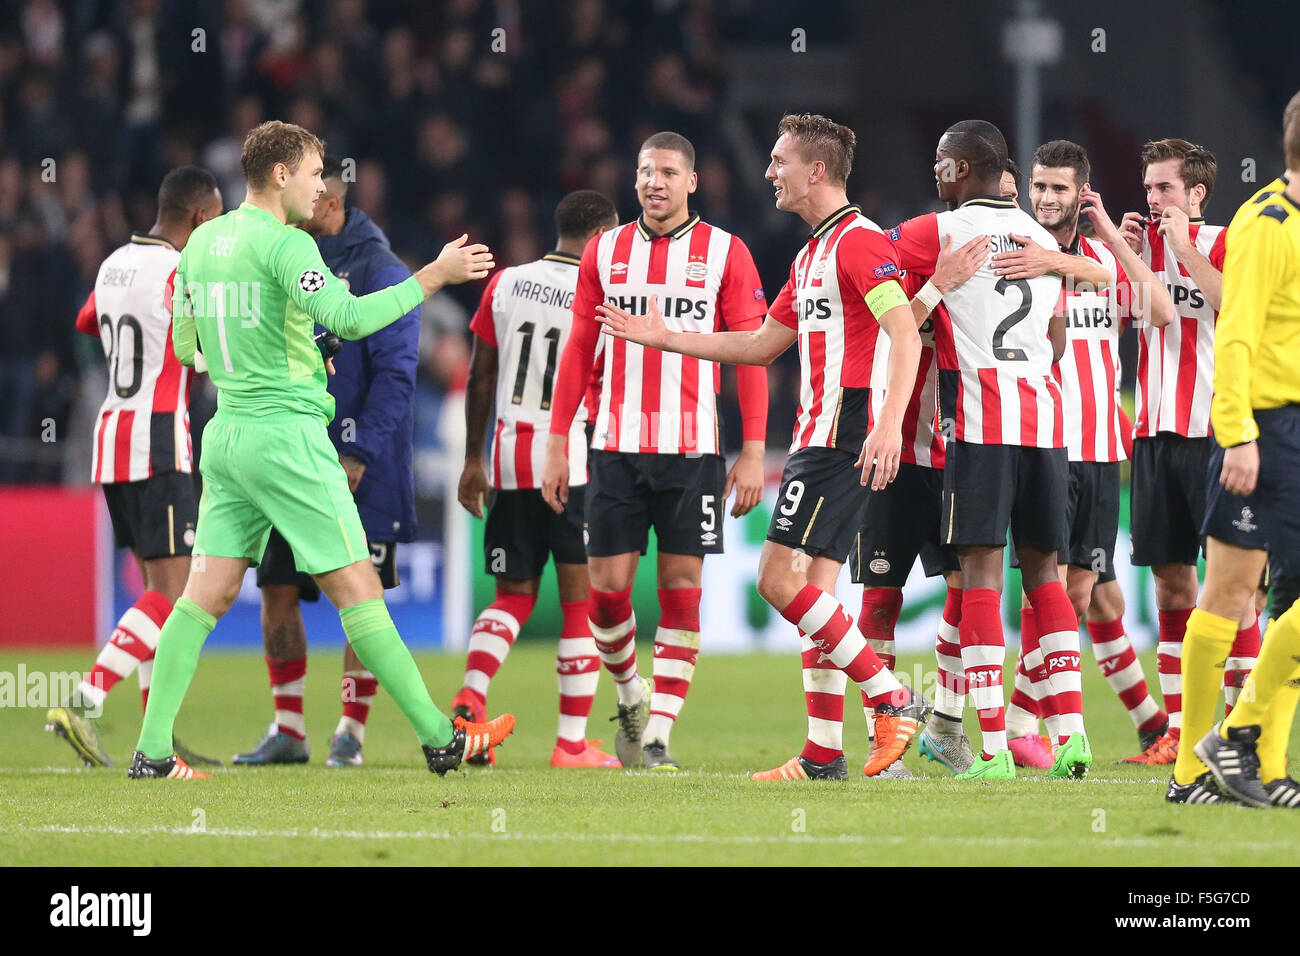 Eindhoven, The Netherlands. 03rd Nov, 2015. Eindhoven players celebrate after the UEFA Champions League Group B soccer match between PSV Eindhoven and VfL Wolfsburg at the PSV Stadium in Eindhoven, The Netherlands, 03 November 2015. Photo: Maja Hitij/dpa/Alamy Live News Stock Photo